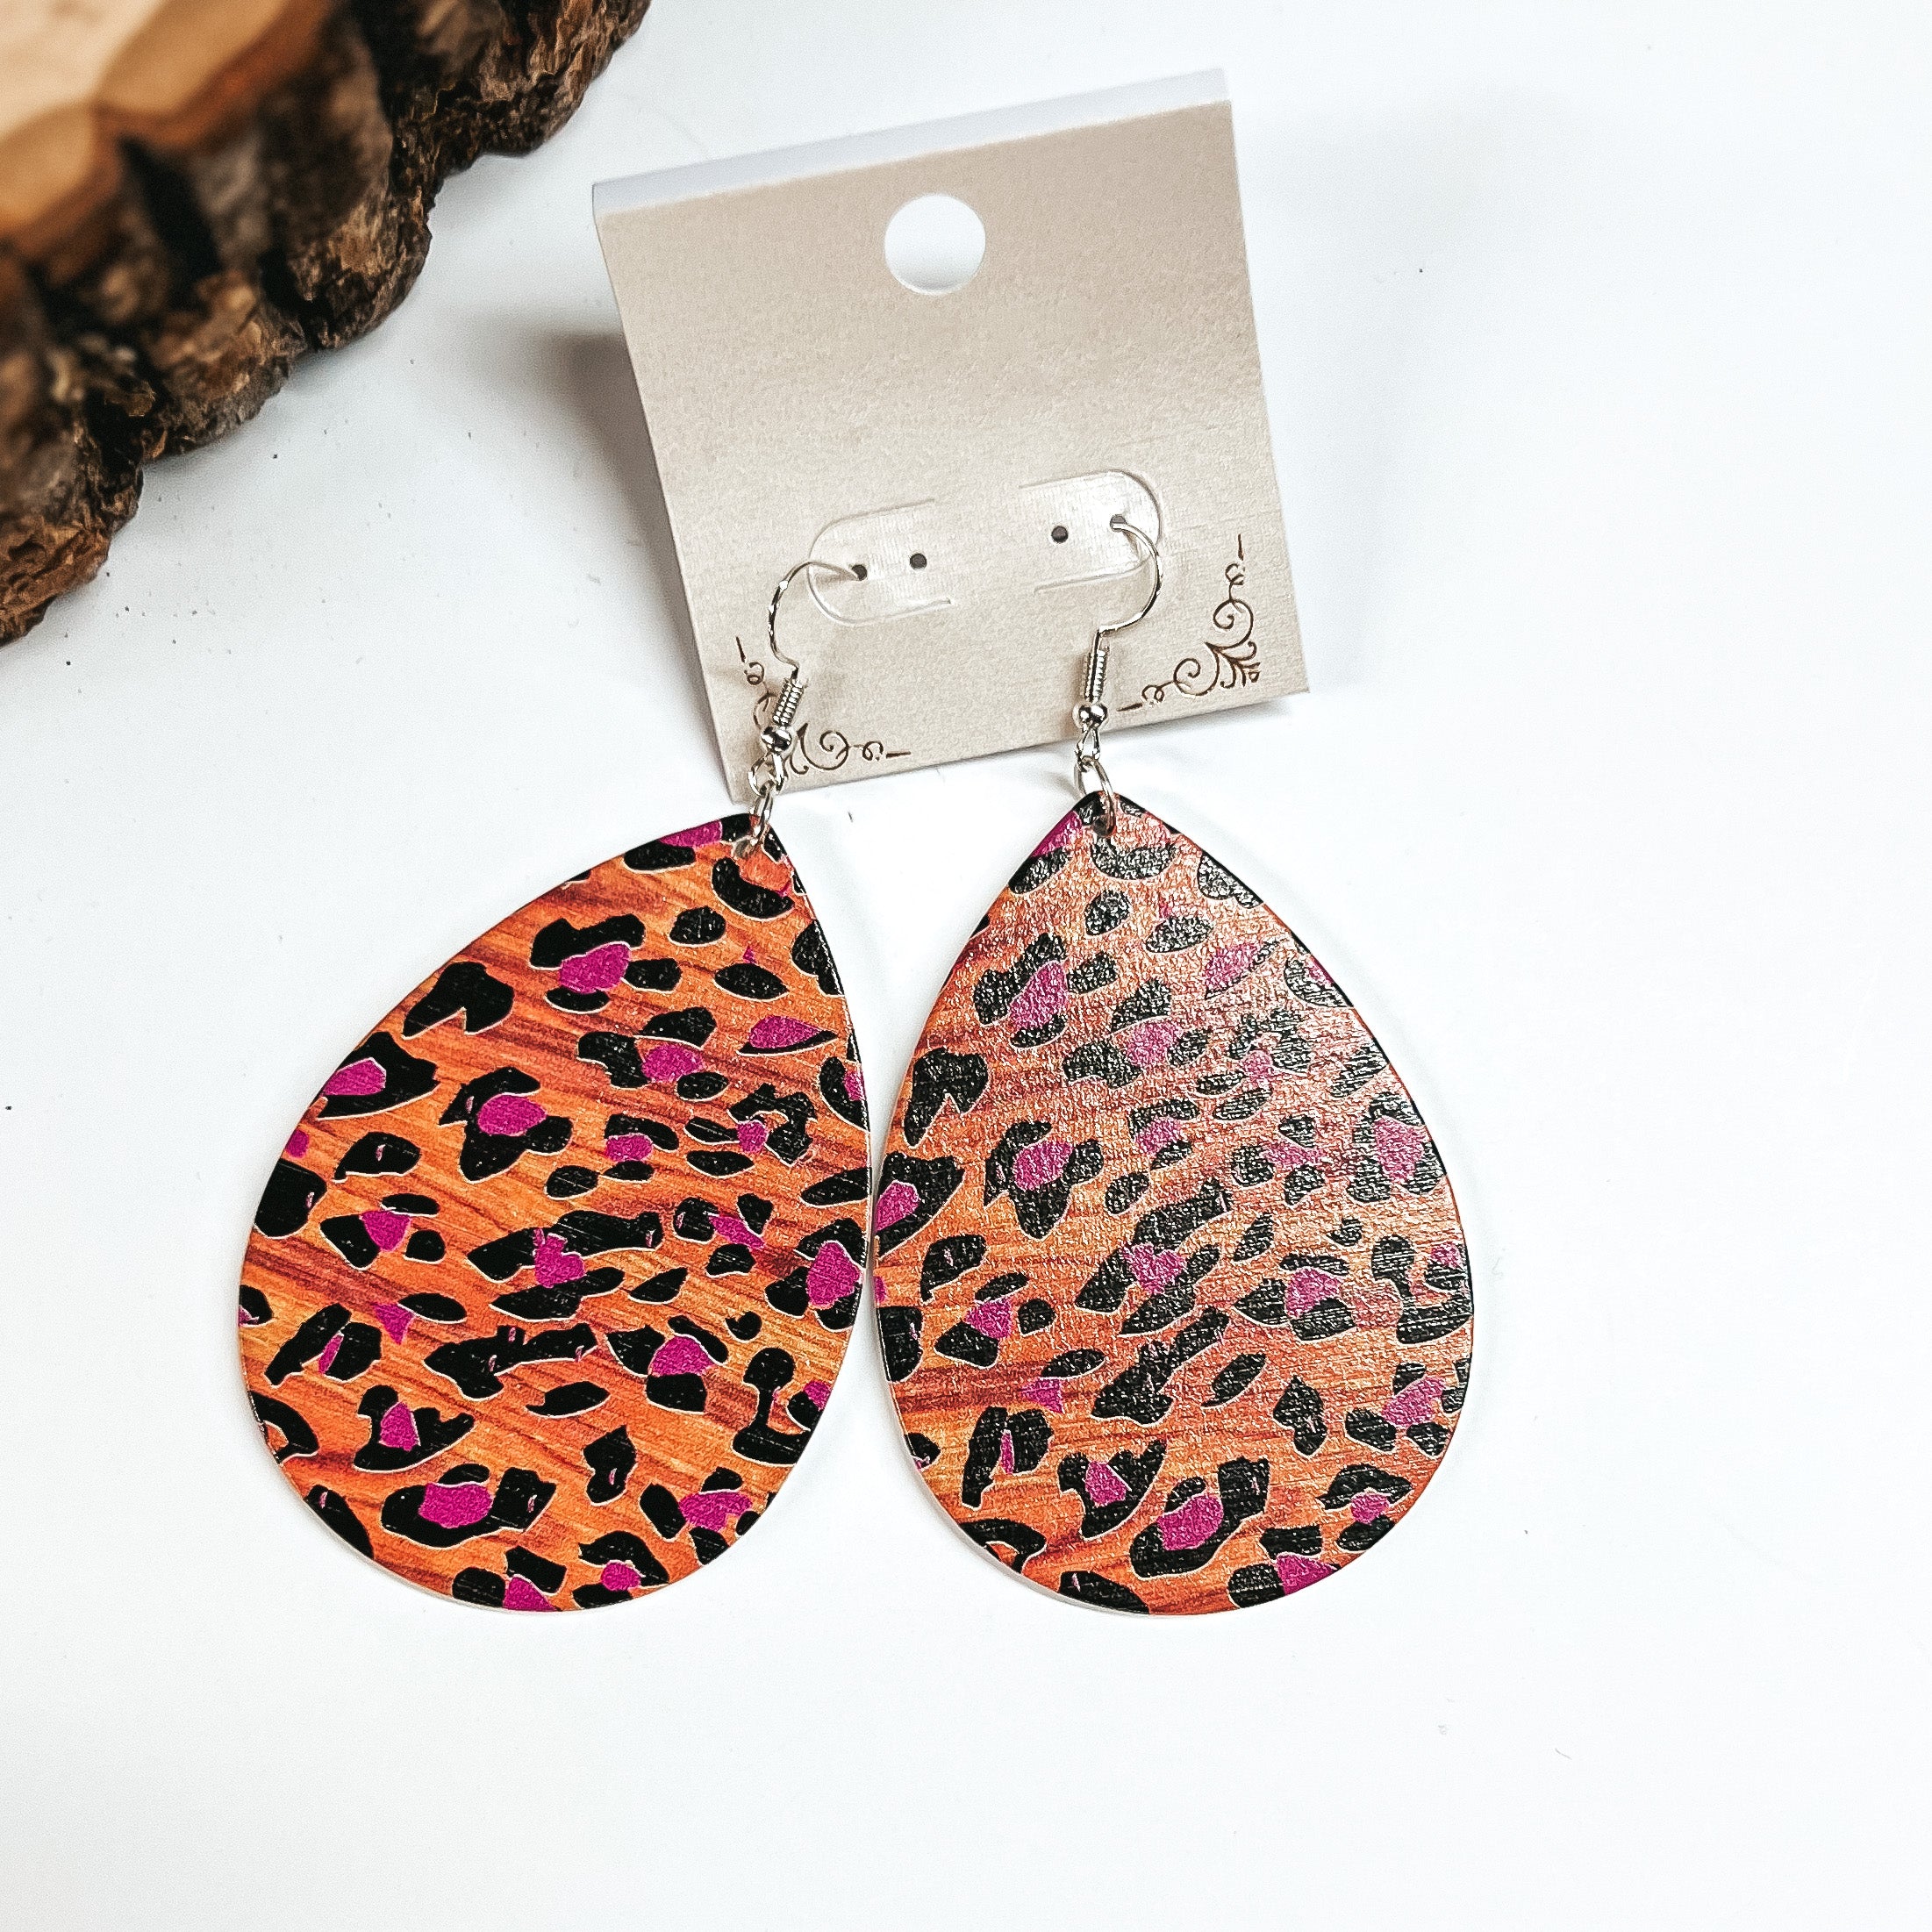 These are brown wooden teardrop earrings in leopard print and purple detailing. These earrings are placed on a white earring card holder, they are laying on a  white background with a slab of wood in the back as decor.